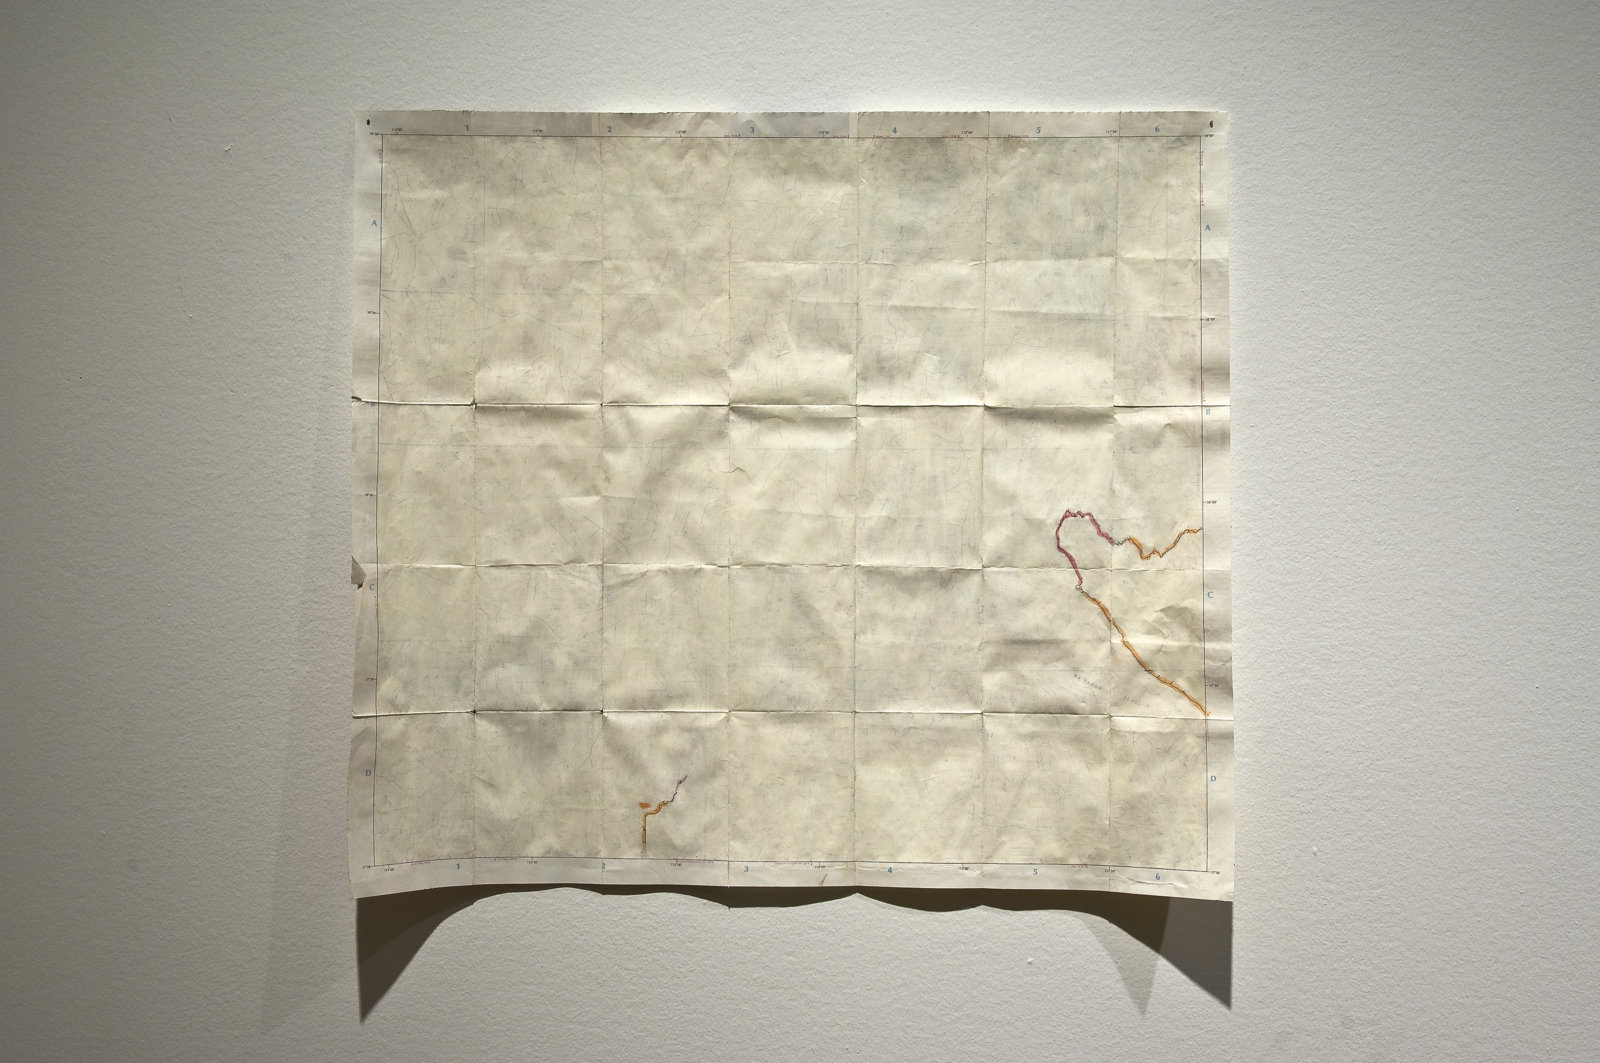 Ashes Withyman, Map (from Uncertain Pilgrimage), 2006–2009, paper map, 22 x 30 in. (55 x 76 cm). Installation view, Nomads, National Gallery of Canada, Ottawa, 2009